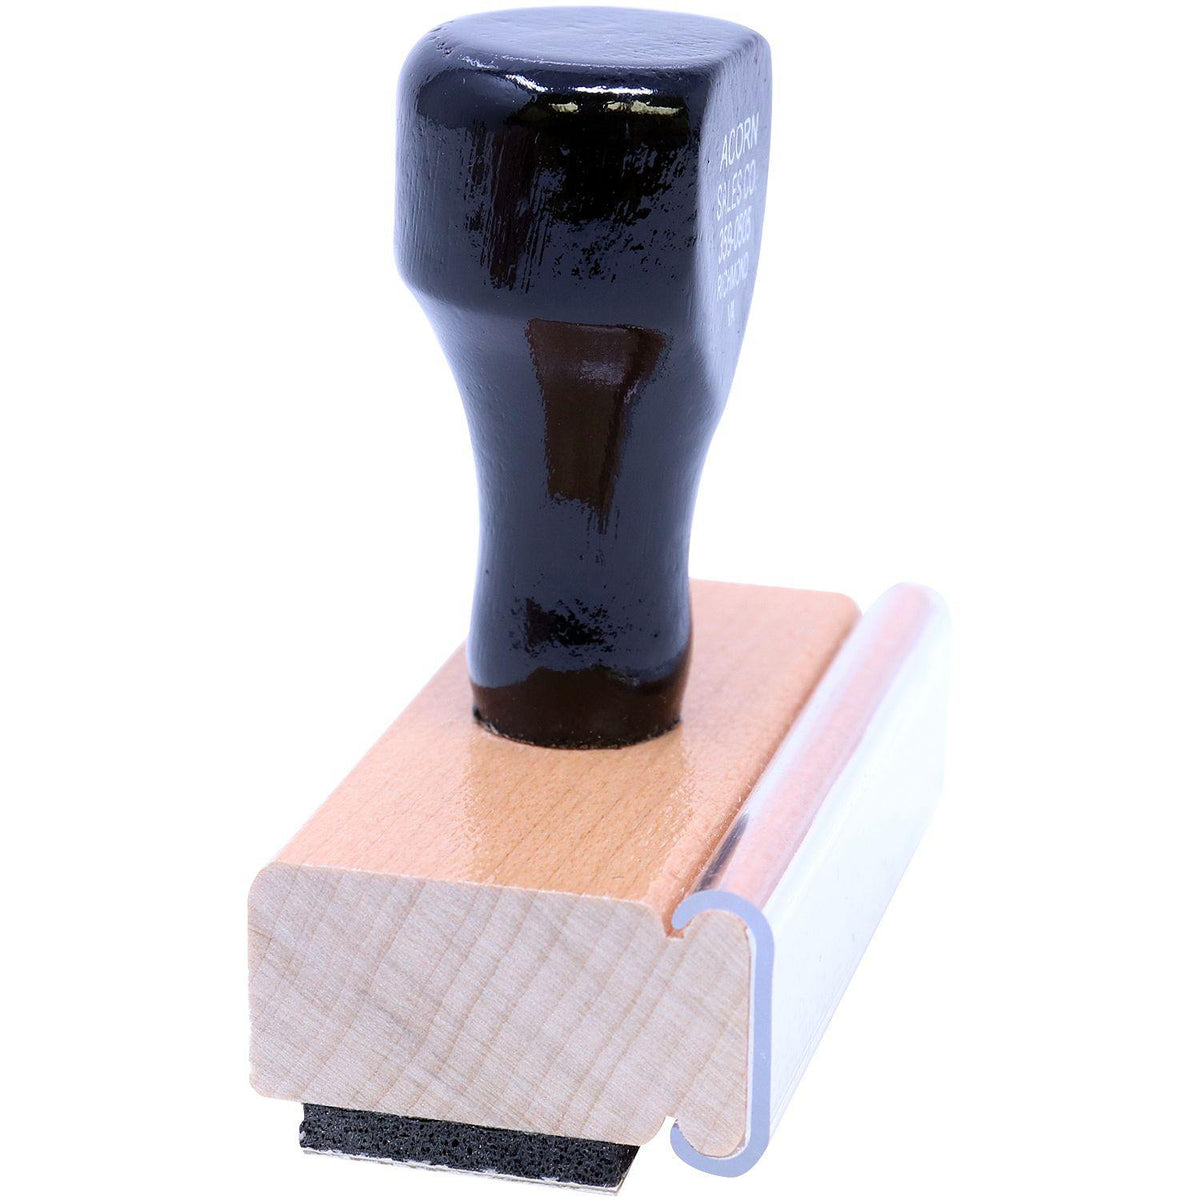 Side View of Hepatitis Rubber Stamp at an Angle